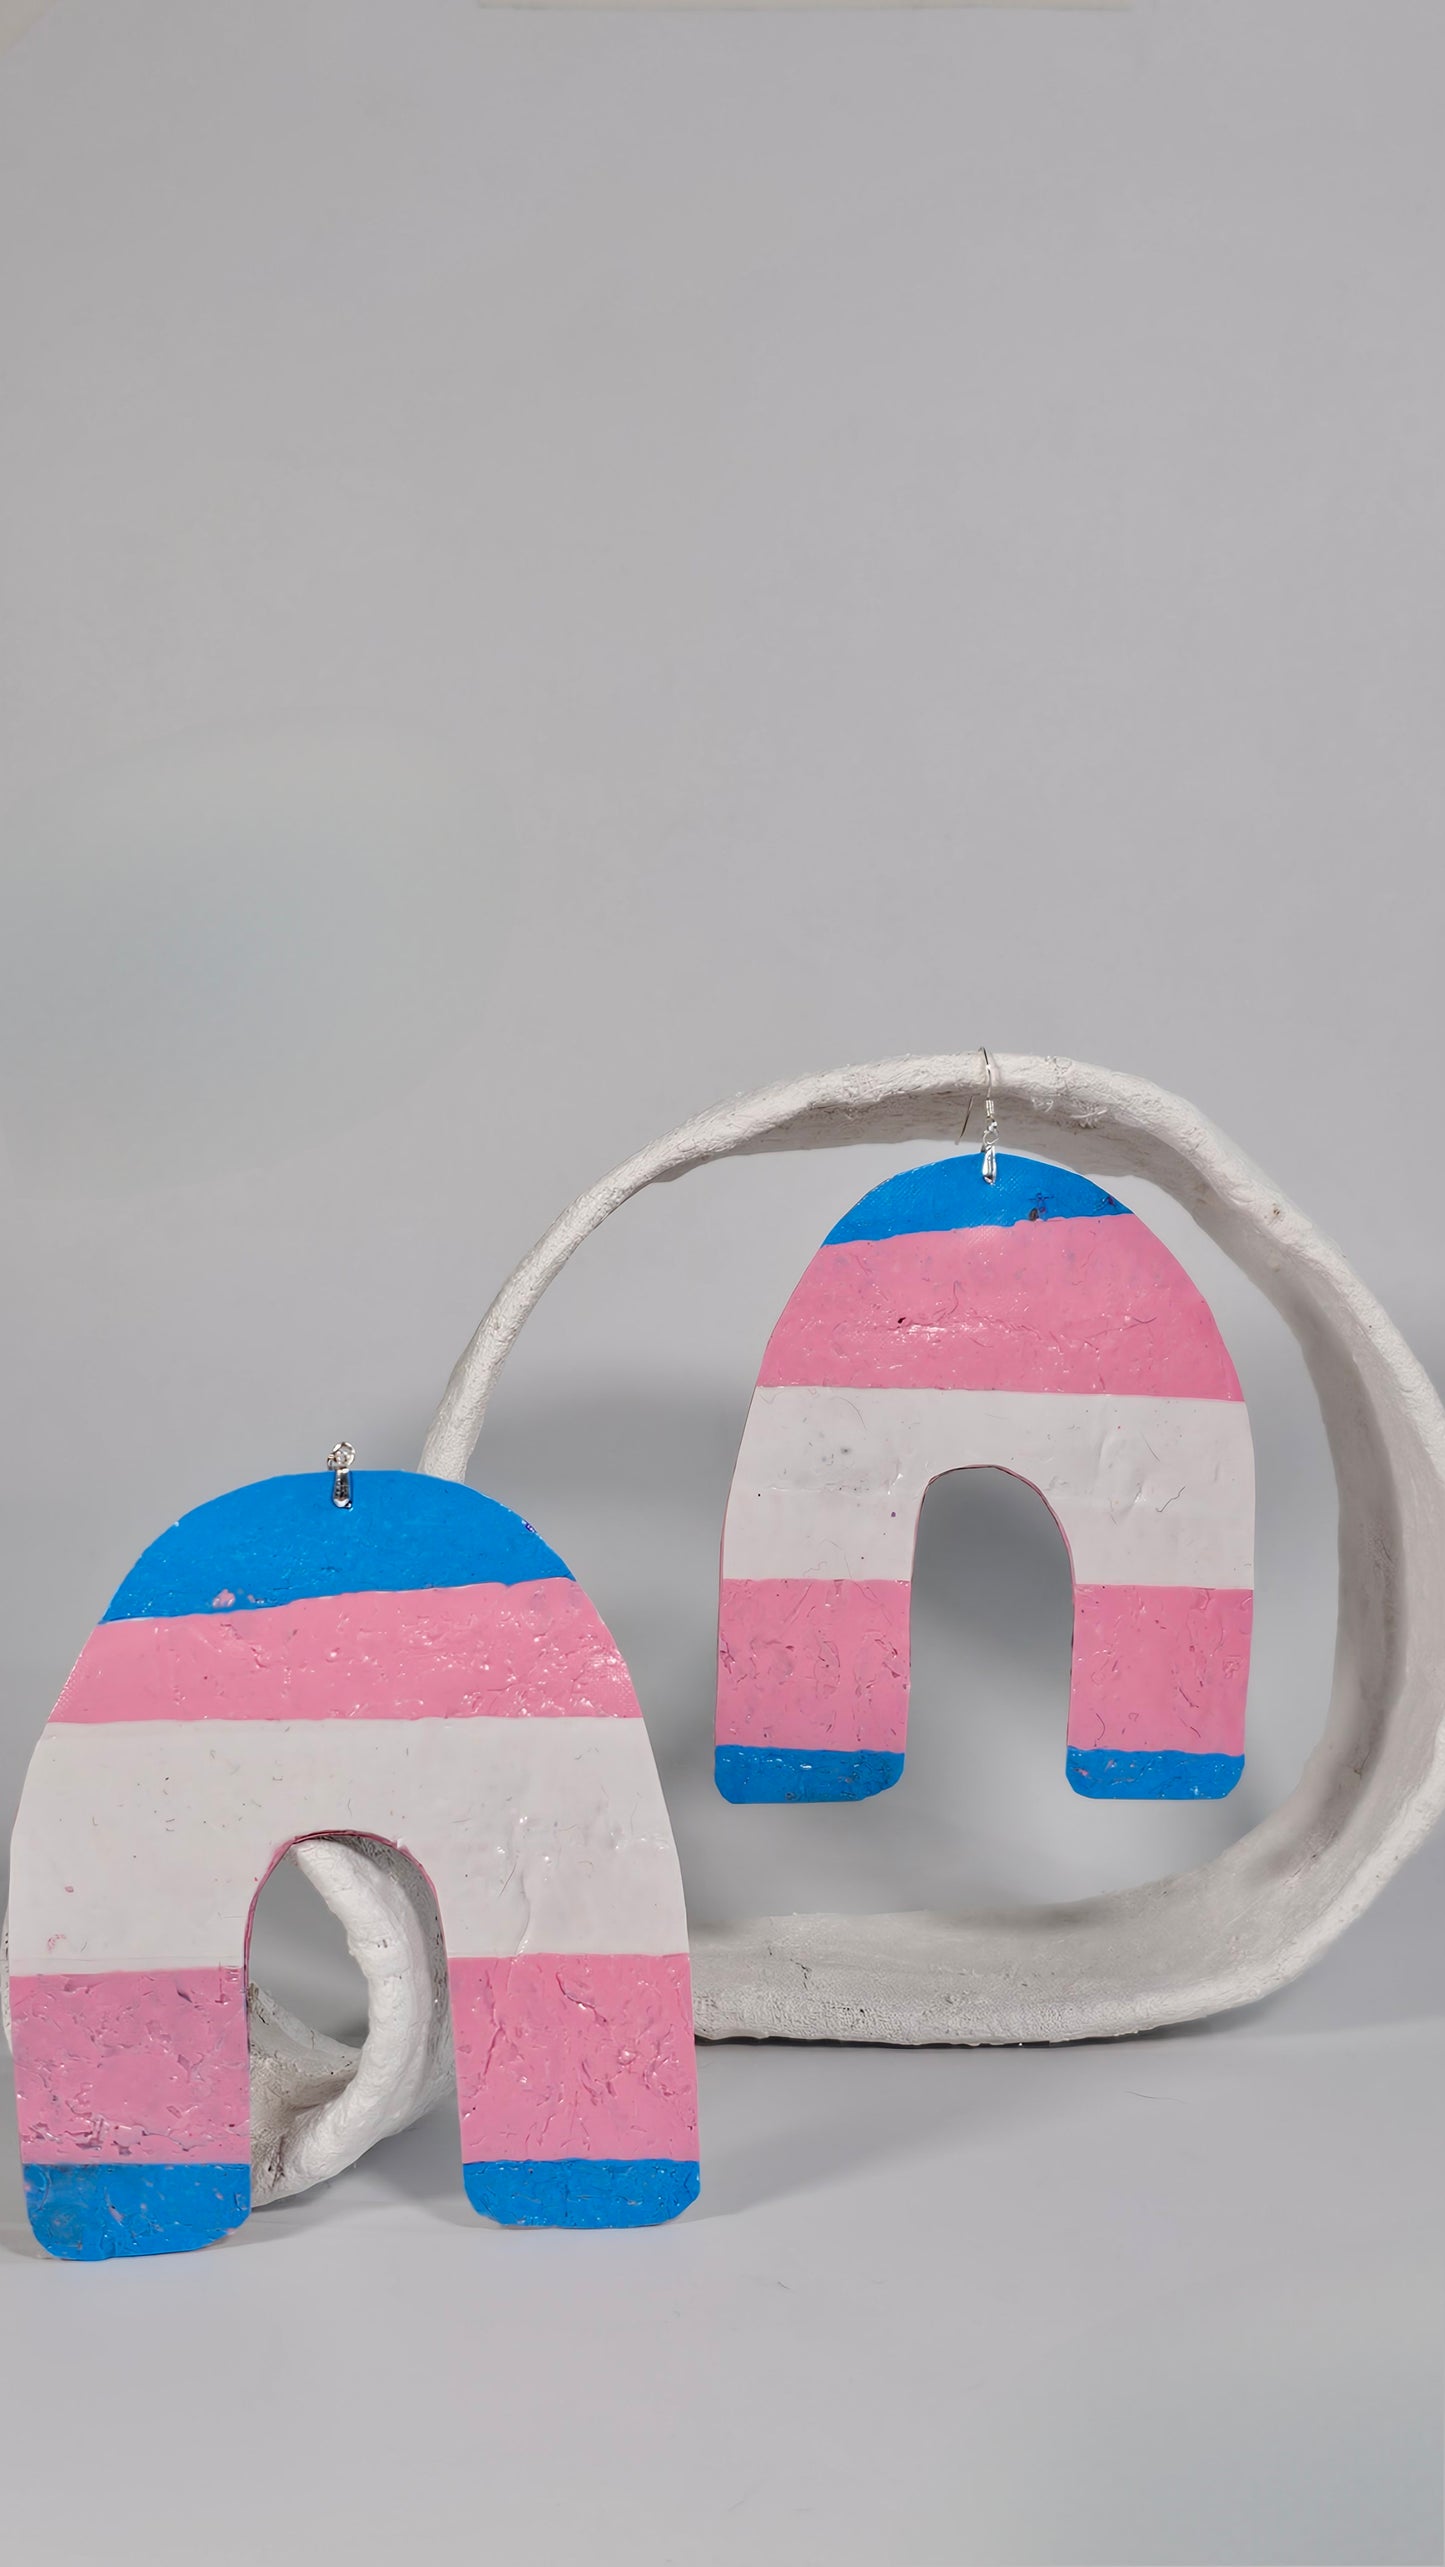 XXL Trans pride rainbow earrings in baby blue white and pink with gold backing -S/S 24 - PLASTIQUE By Siân